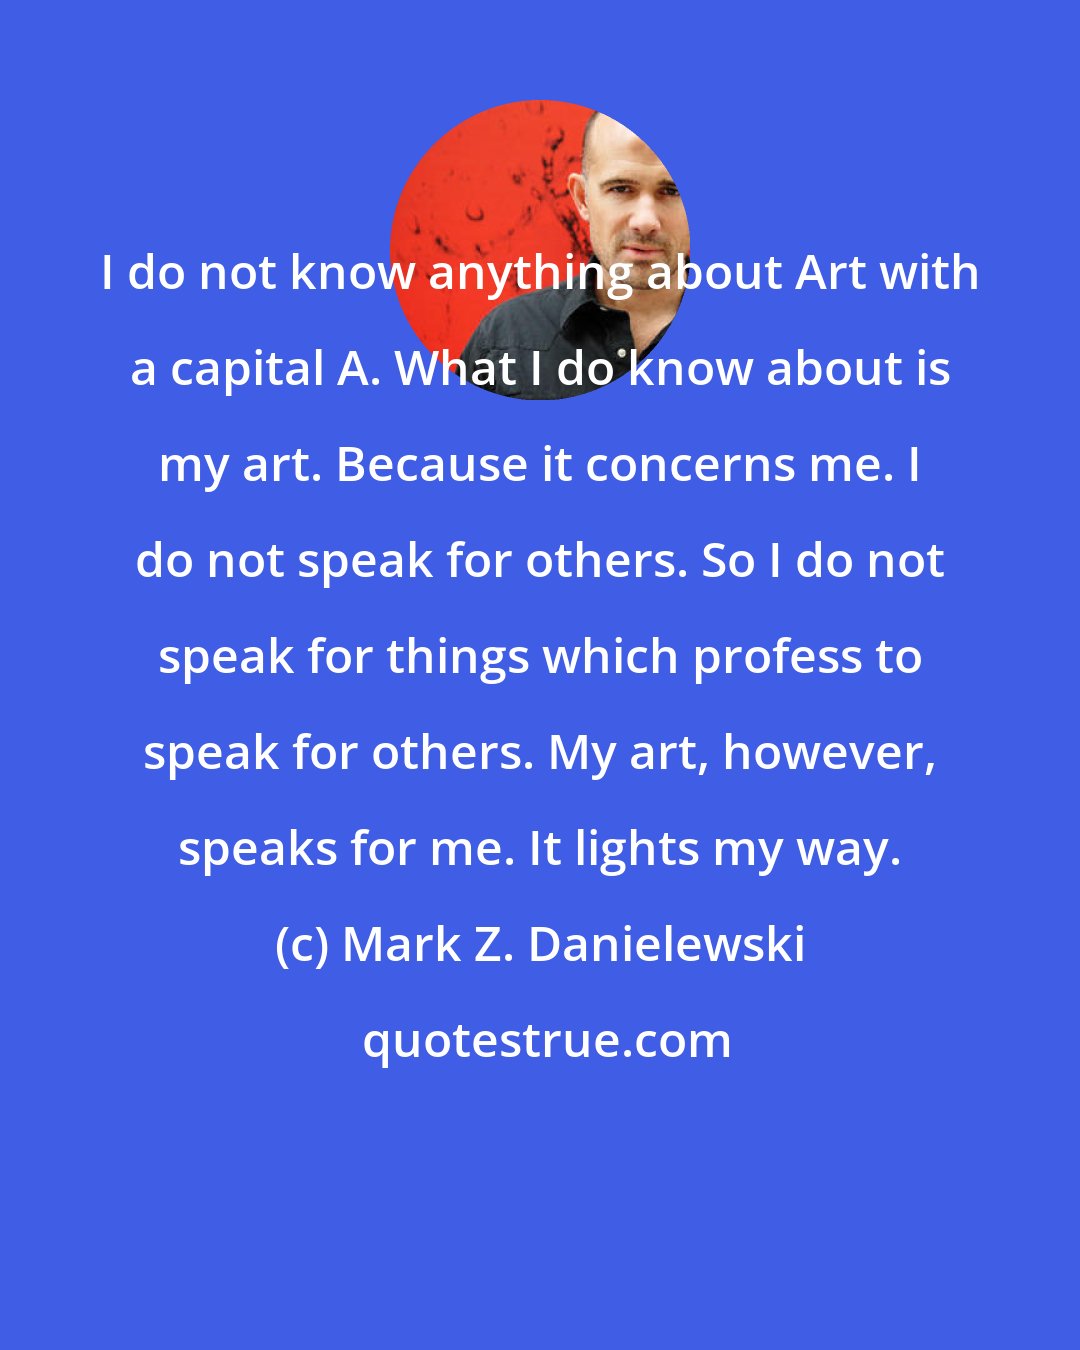 Mark Z. Danielewski: I do not know anything about Art with a capital A. What I do know about is my art. Because it concerns me. I do not speak for others. So I do not speak for things which profess to speak for others. My art, however, speaks for me. It lights my way.